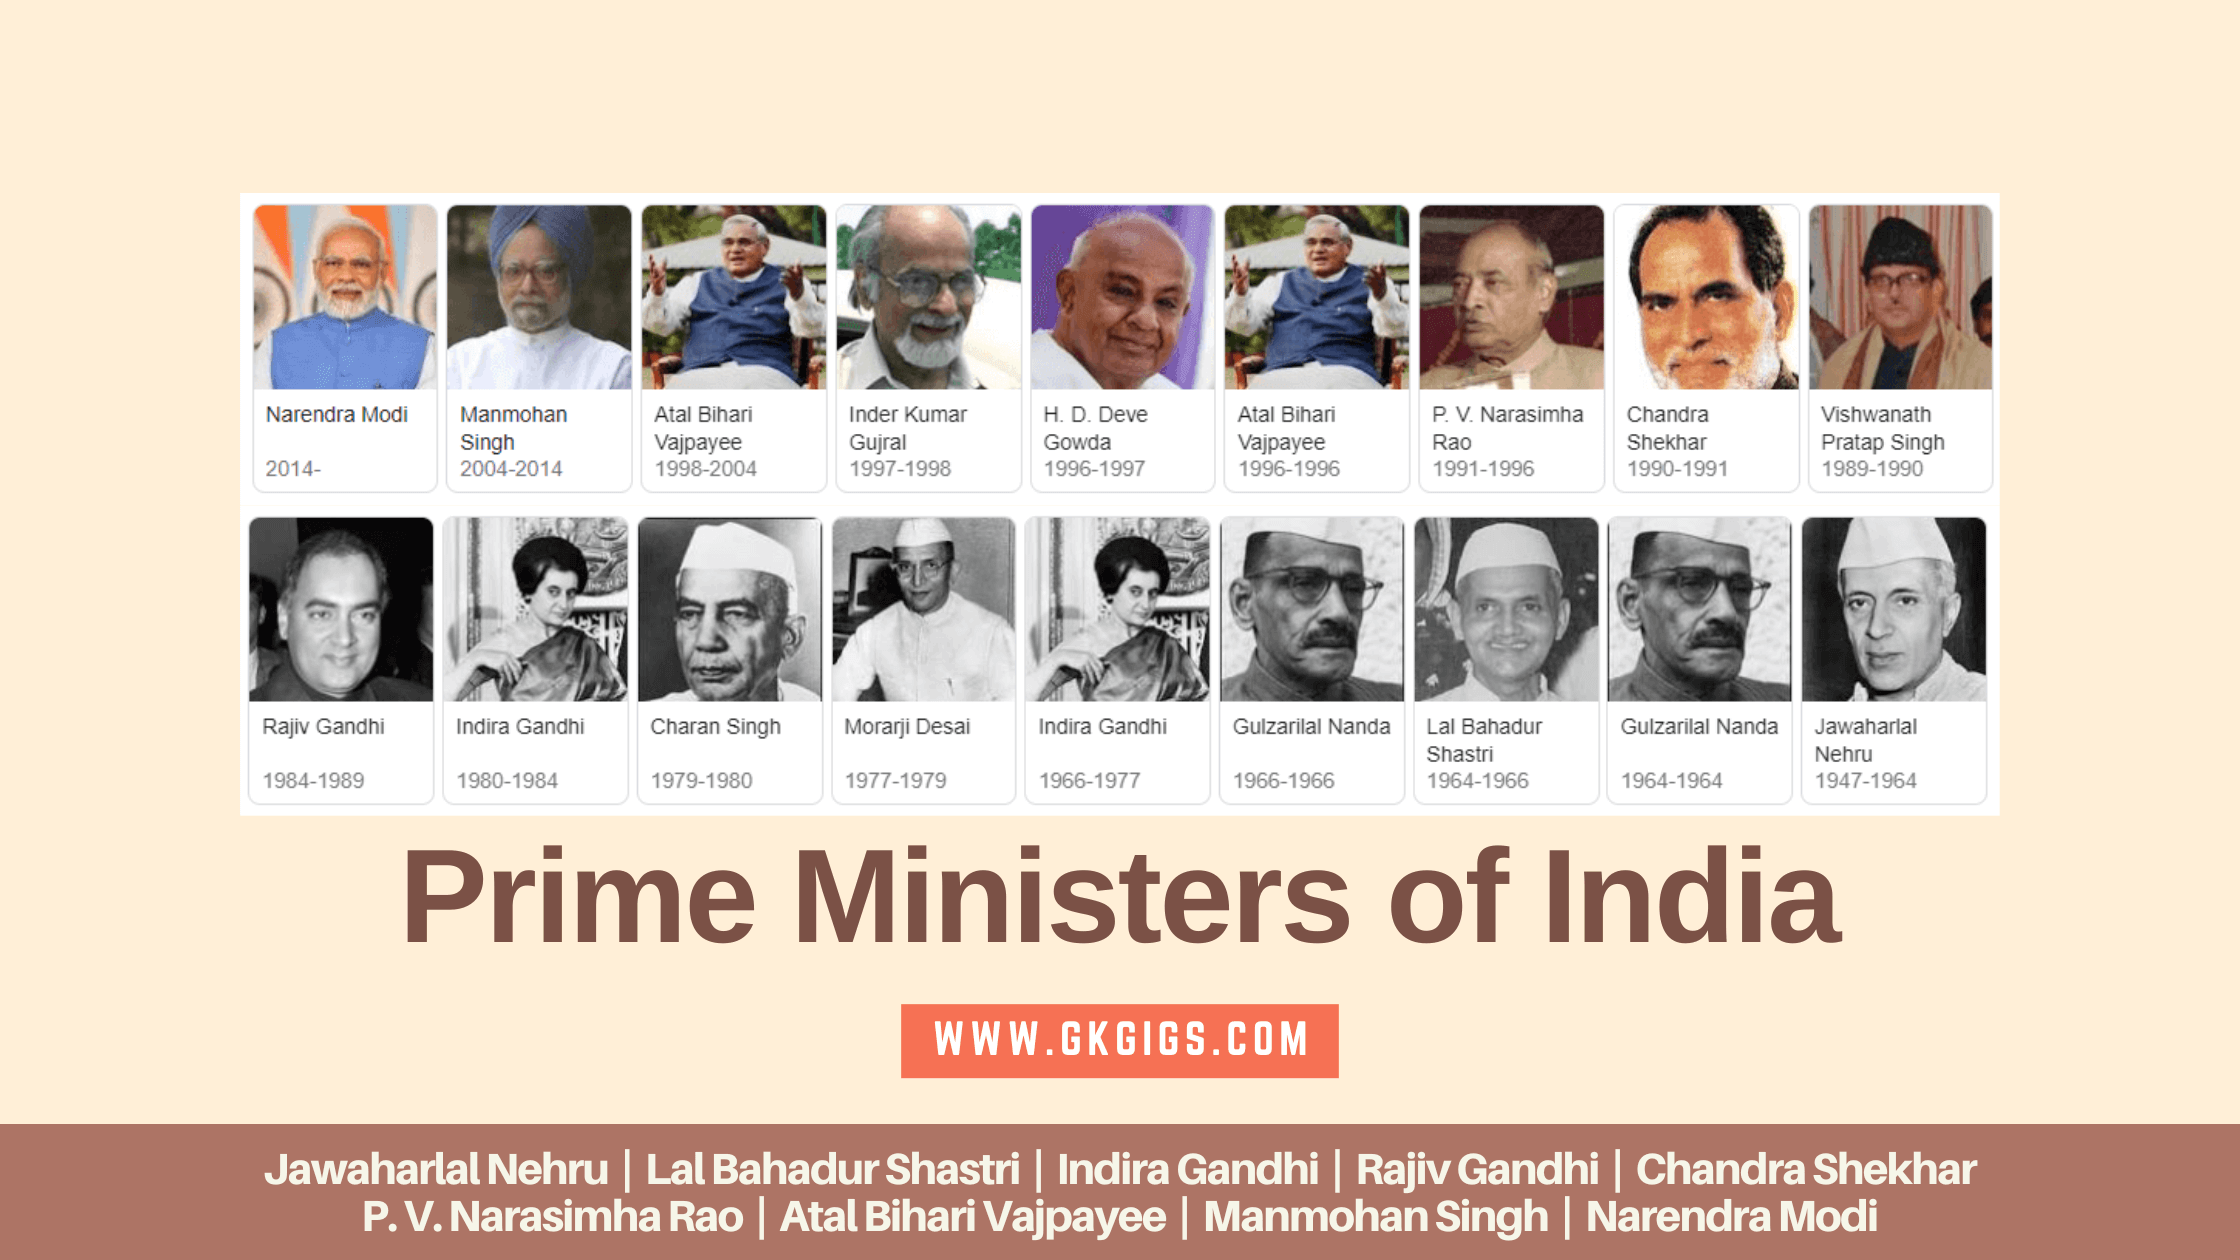 gk-facts-about-indian-prime-ministers-1947-2023-gkgigs